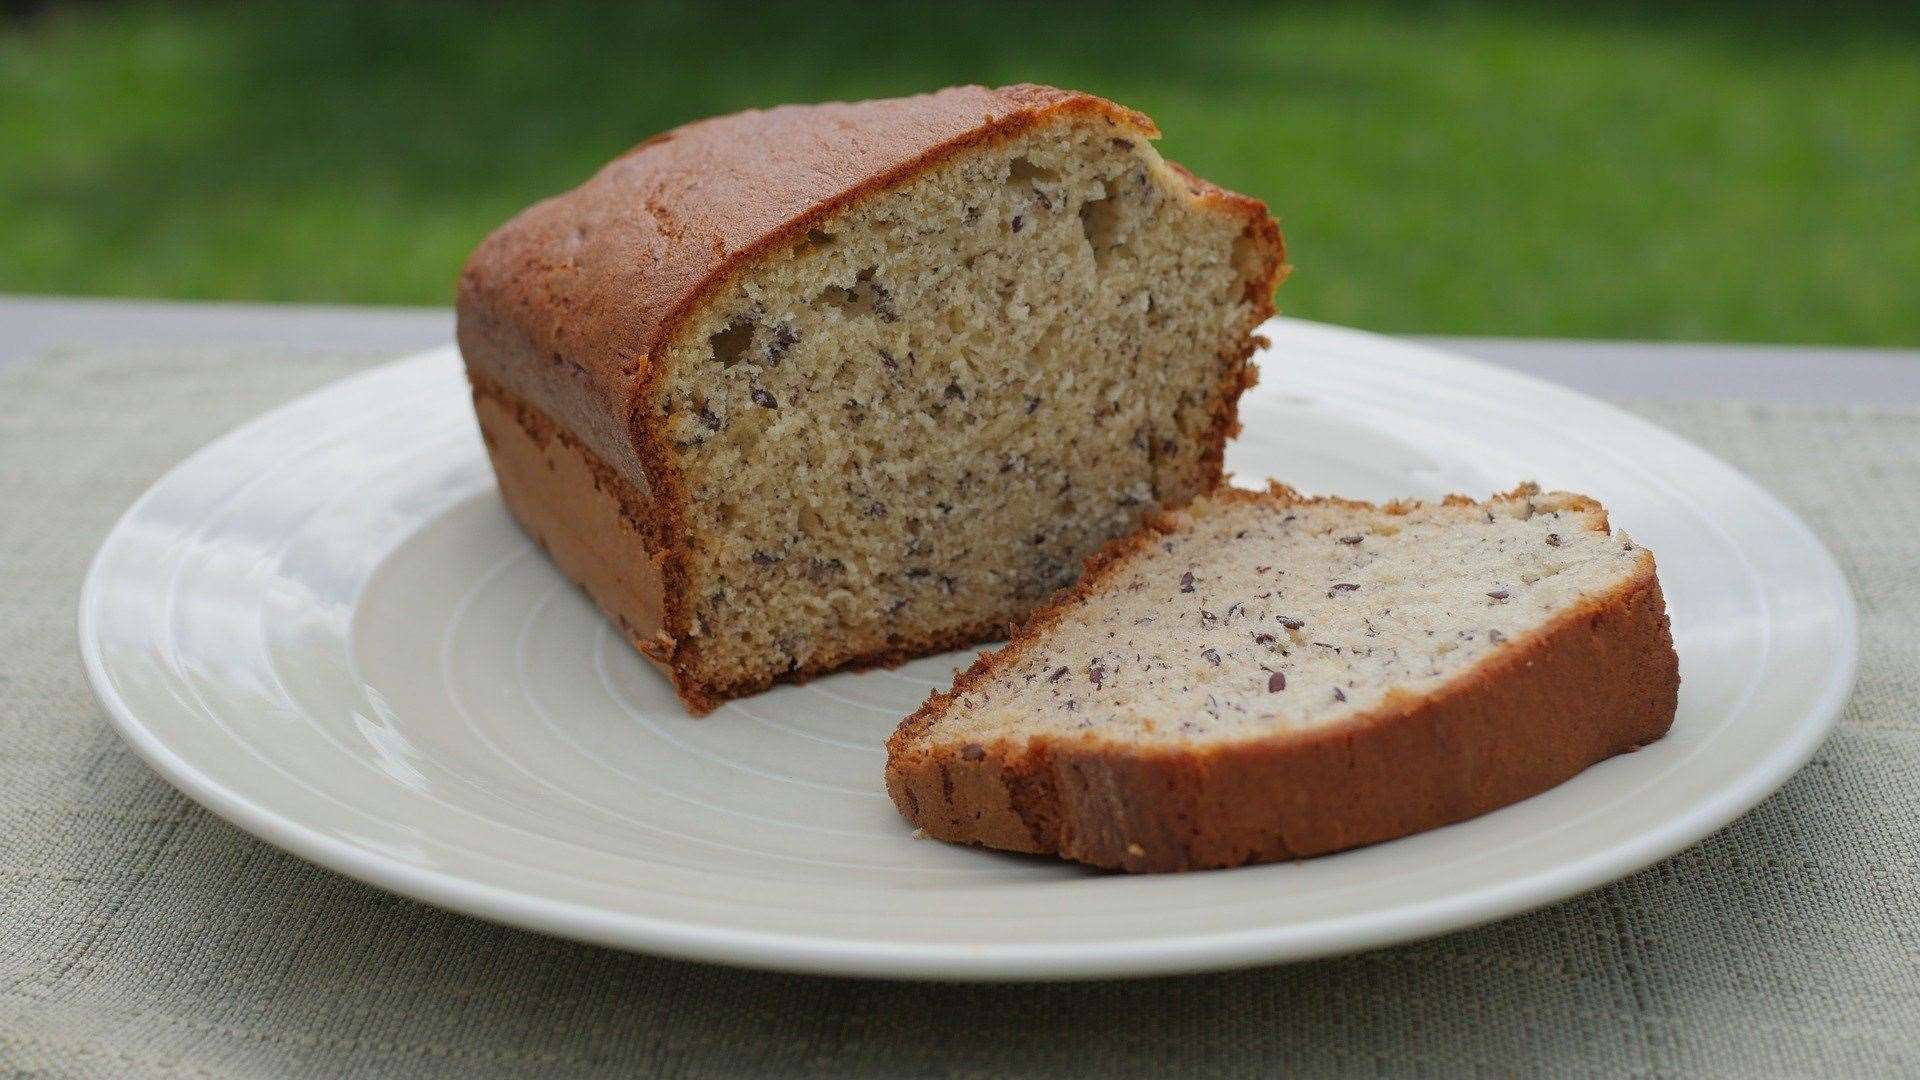 Banana bread was the most searched recipe in 2020 during lockdown